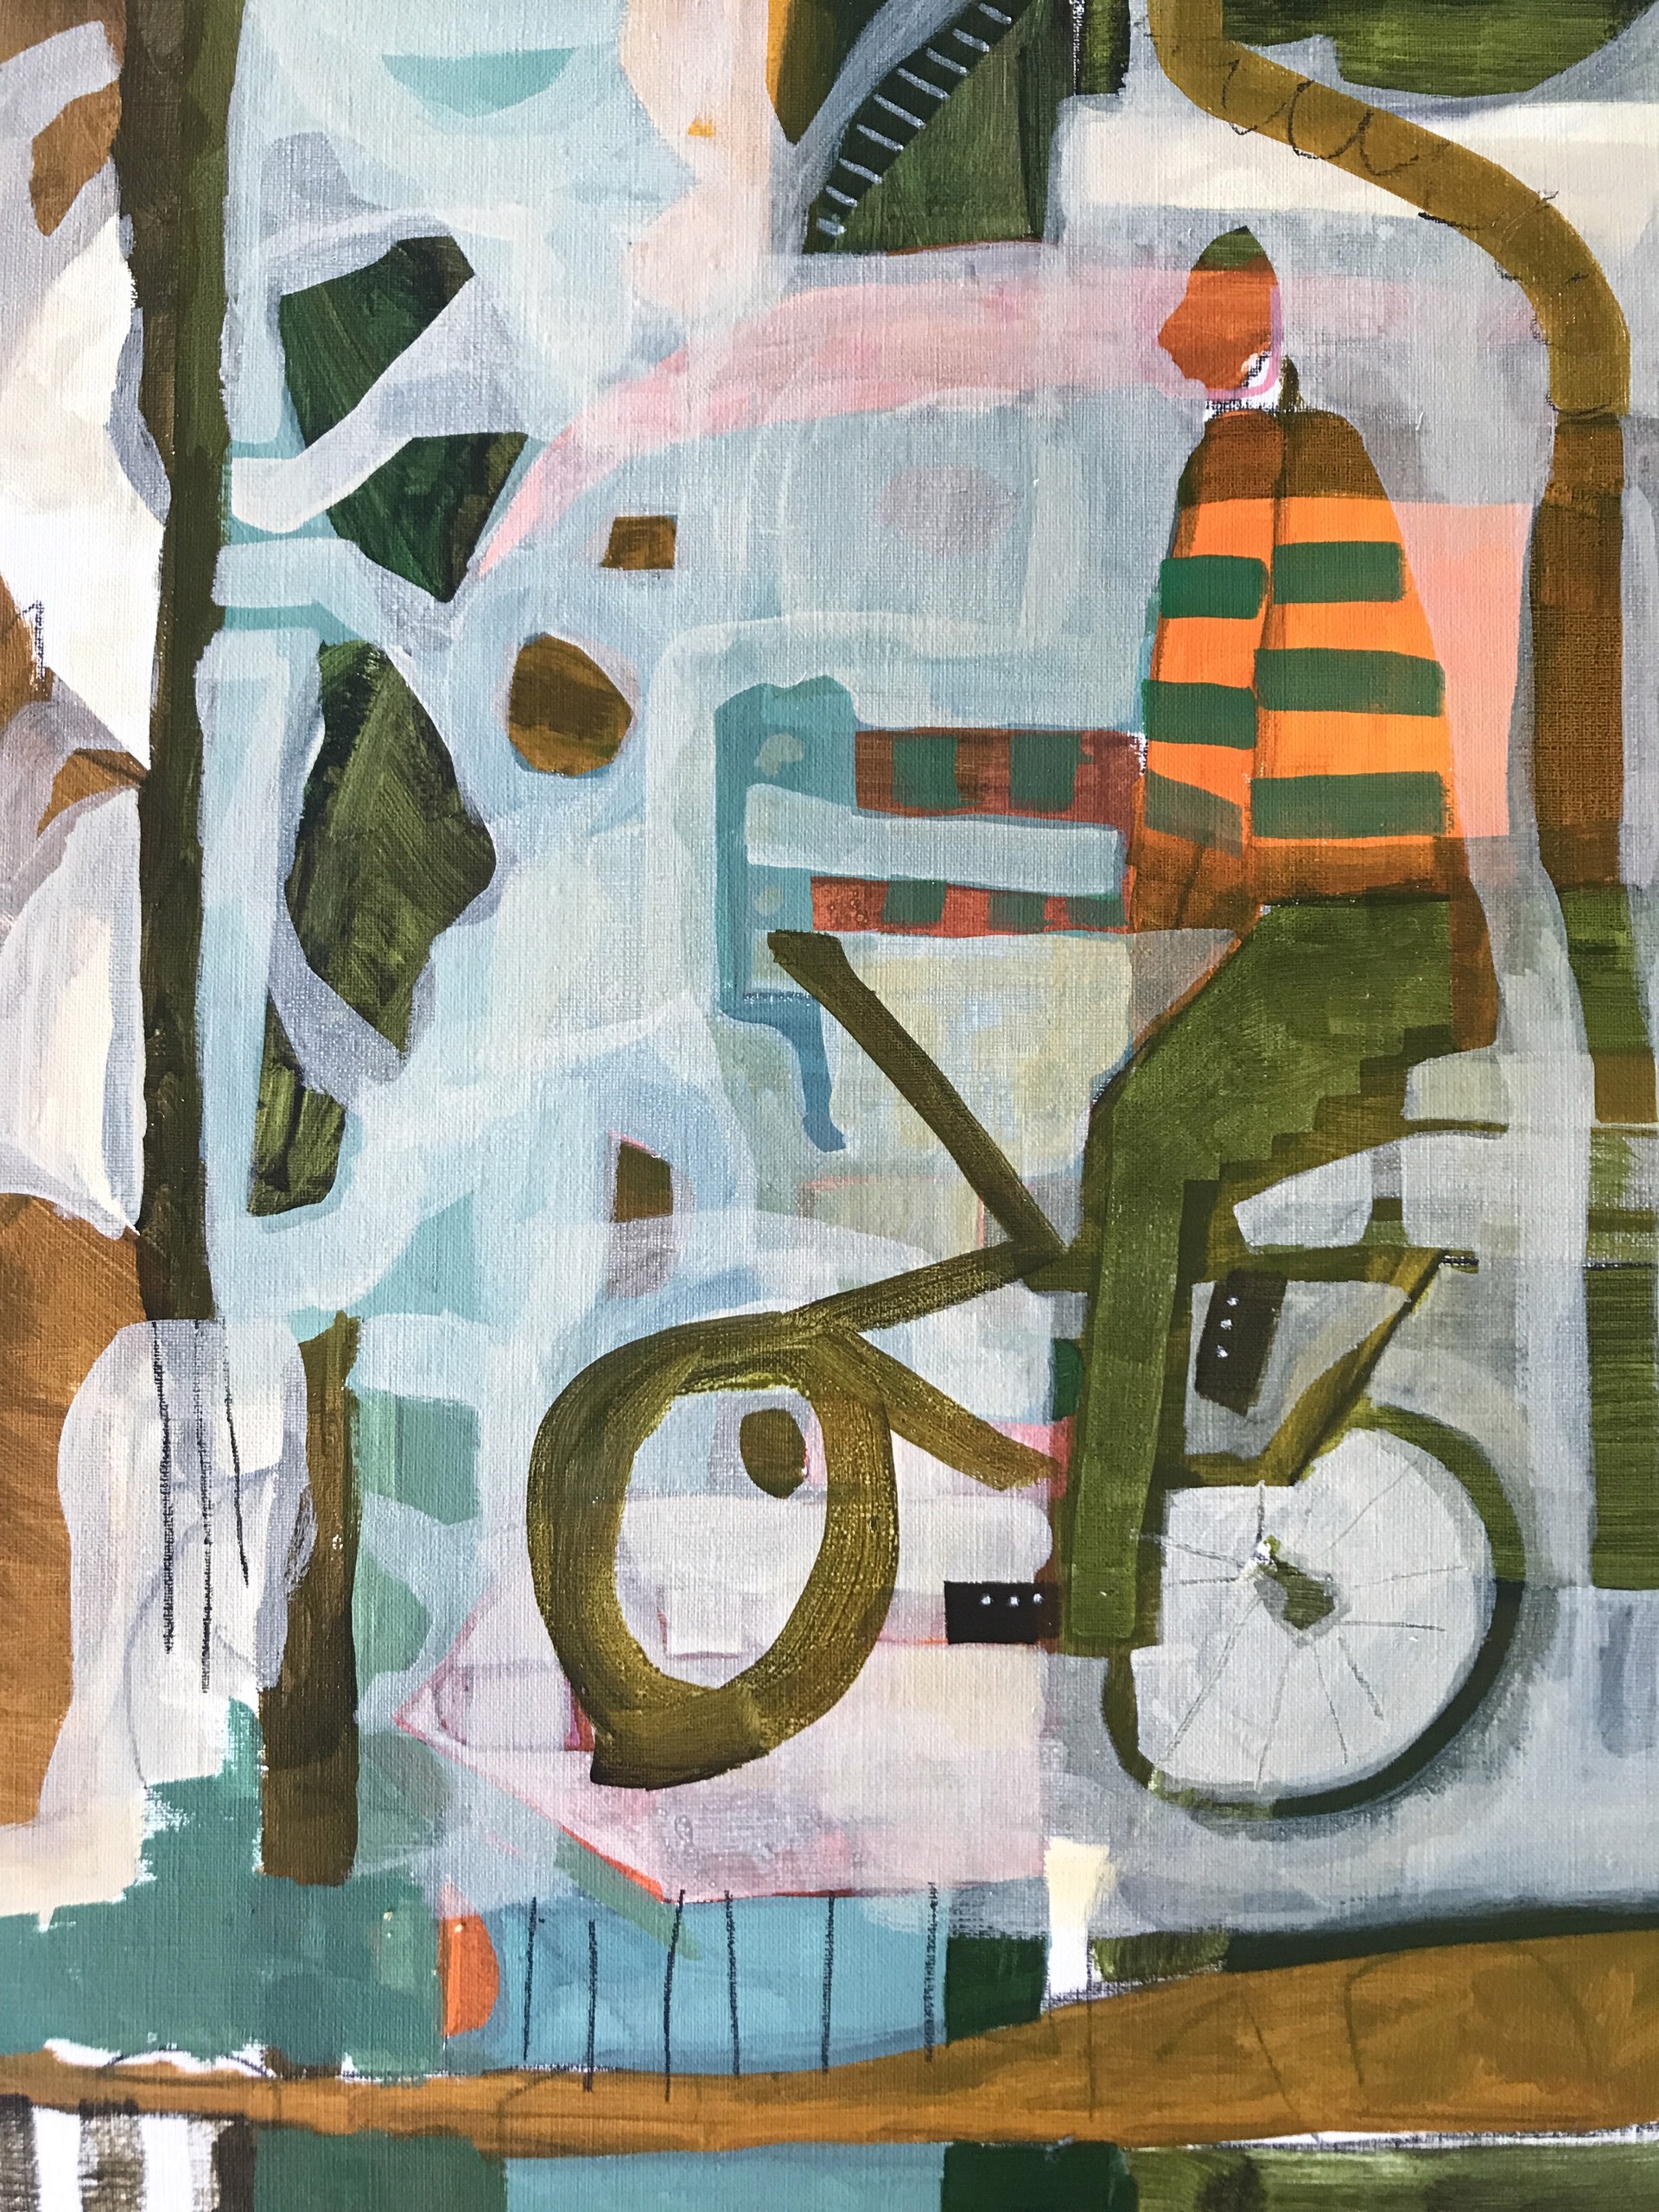 Man in Striped Sweater Bicycling Under Palm Trees by Rachael Van Dyke